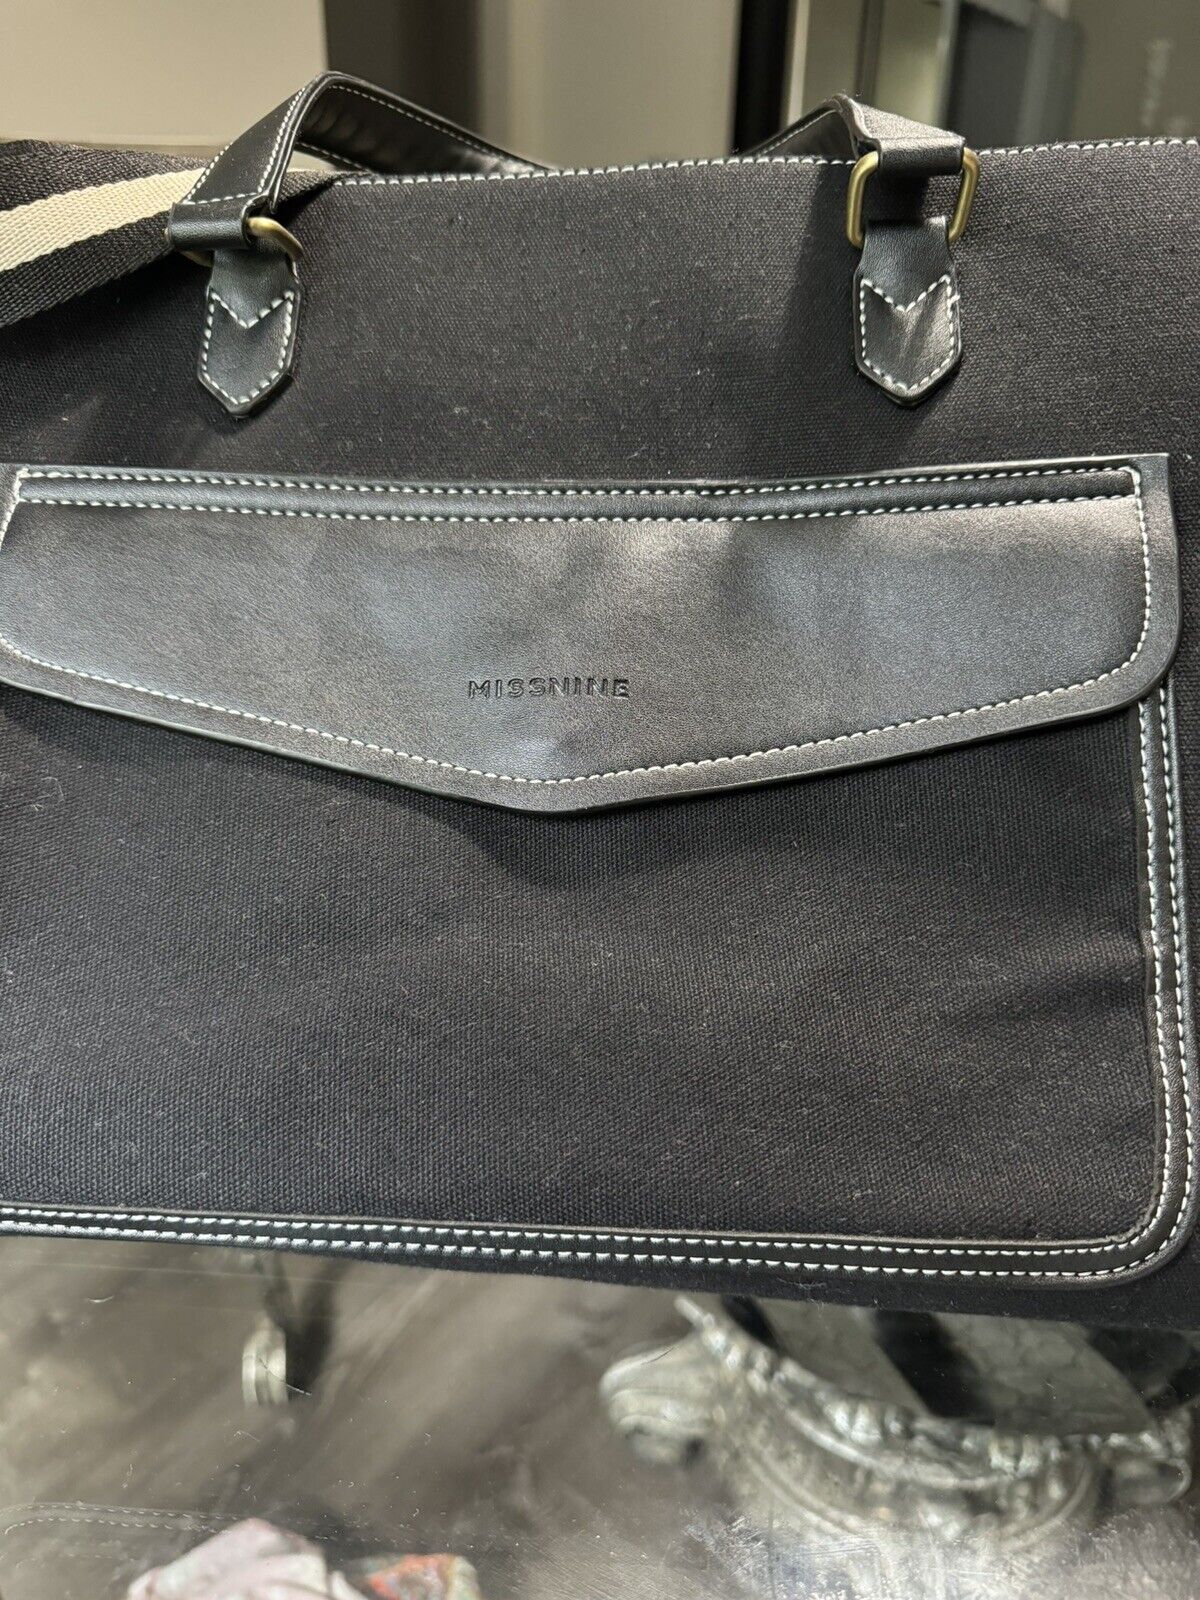 MISSNINE Laptop Bag With Luggage Attachment Strap